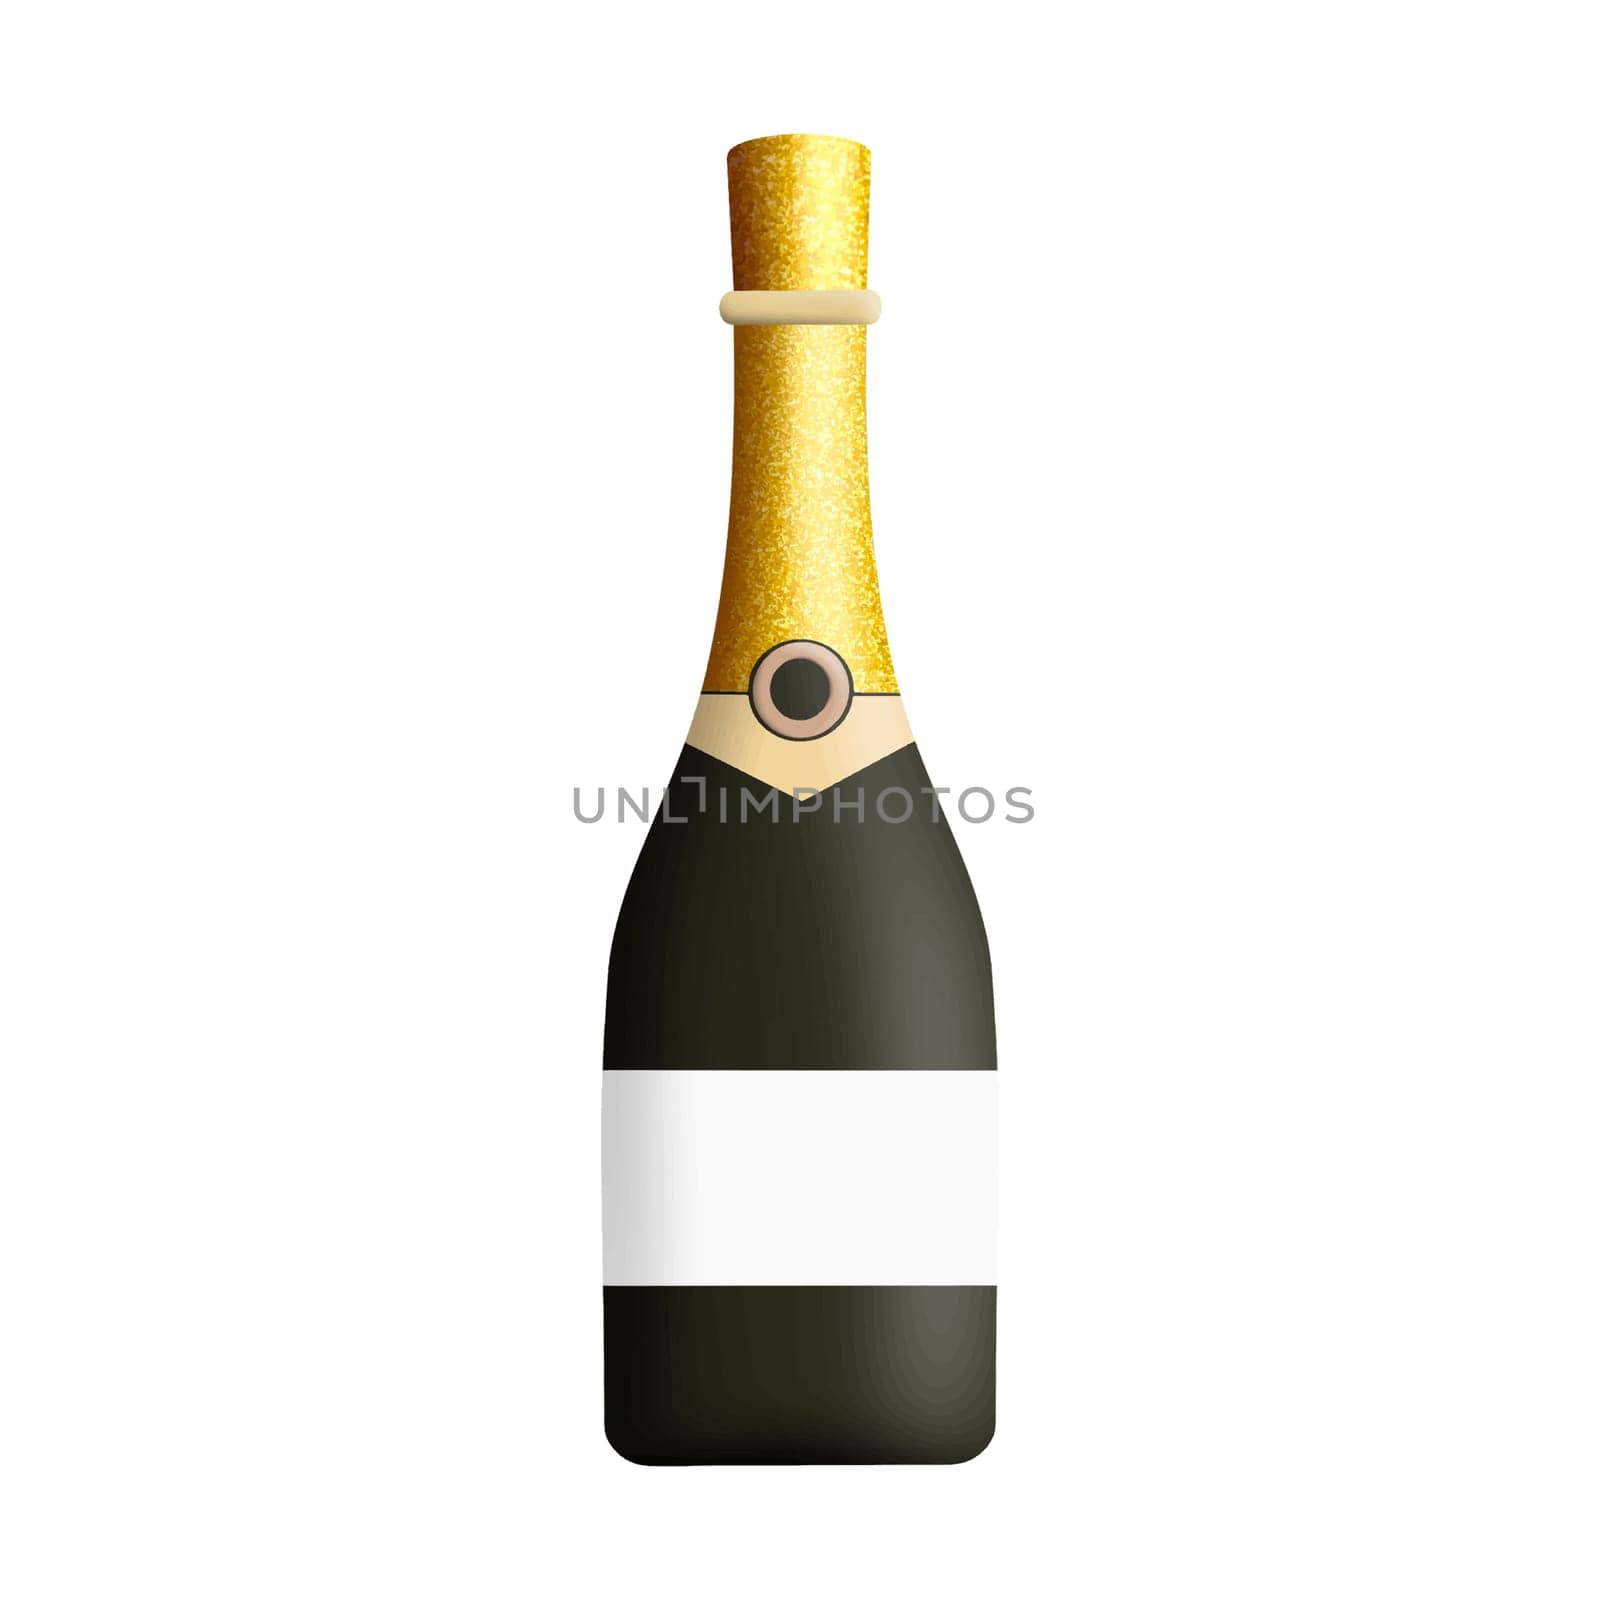 Champagne Bottle with Blank Label Party illustration isolated Clipart  by Skyecreativestudio